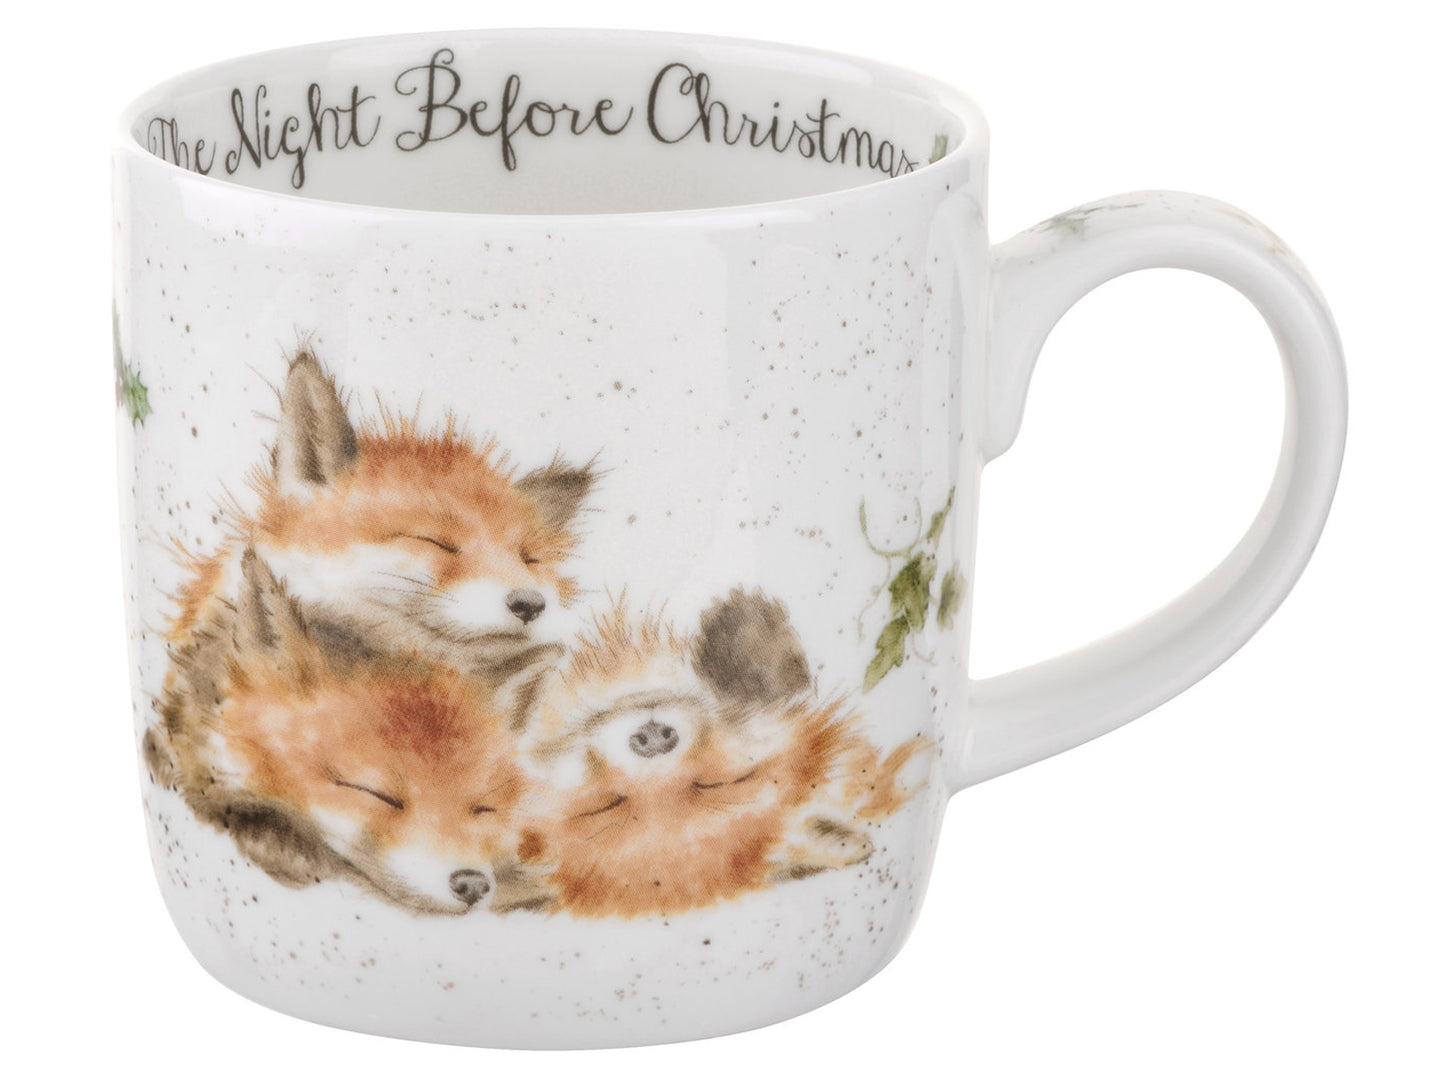 The Night Before Christmas Wrendale Mug with 3 sleeping baby foxes